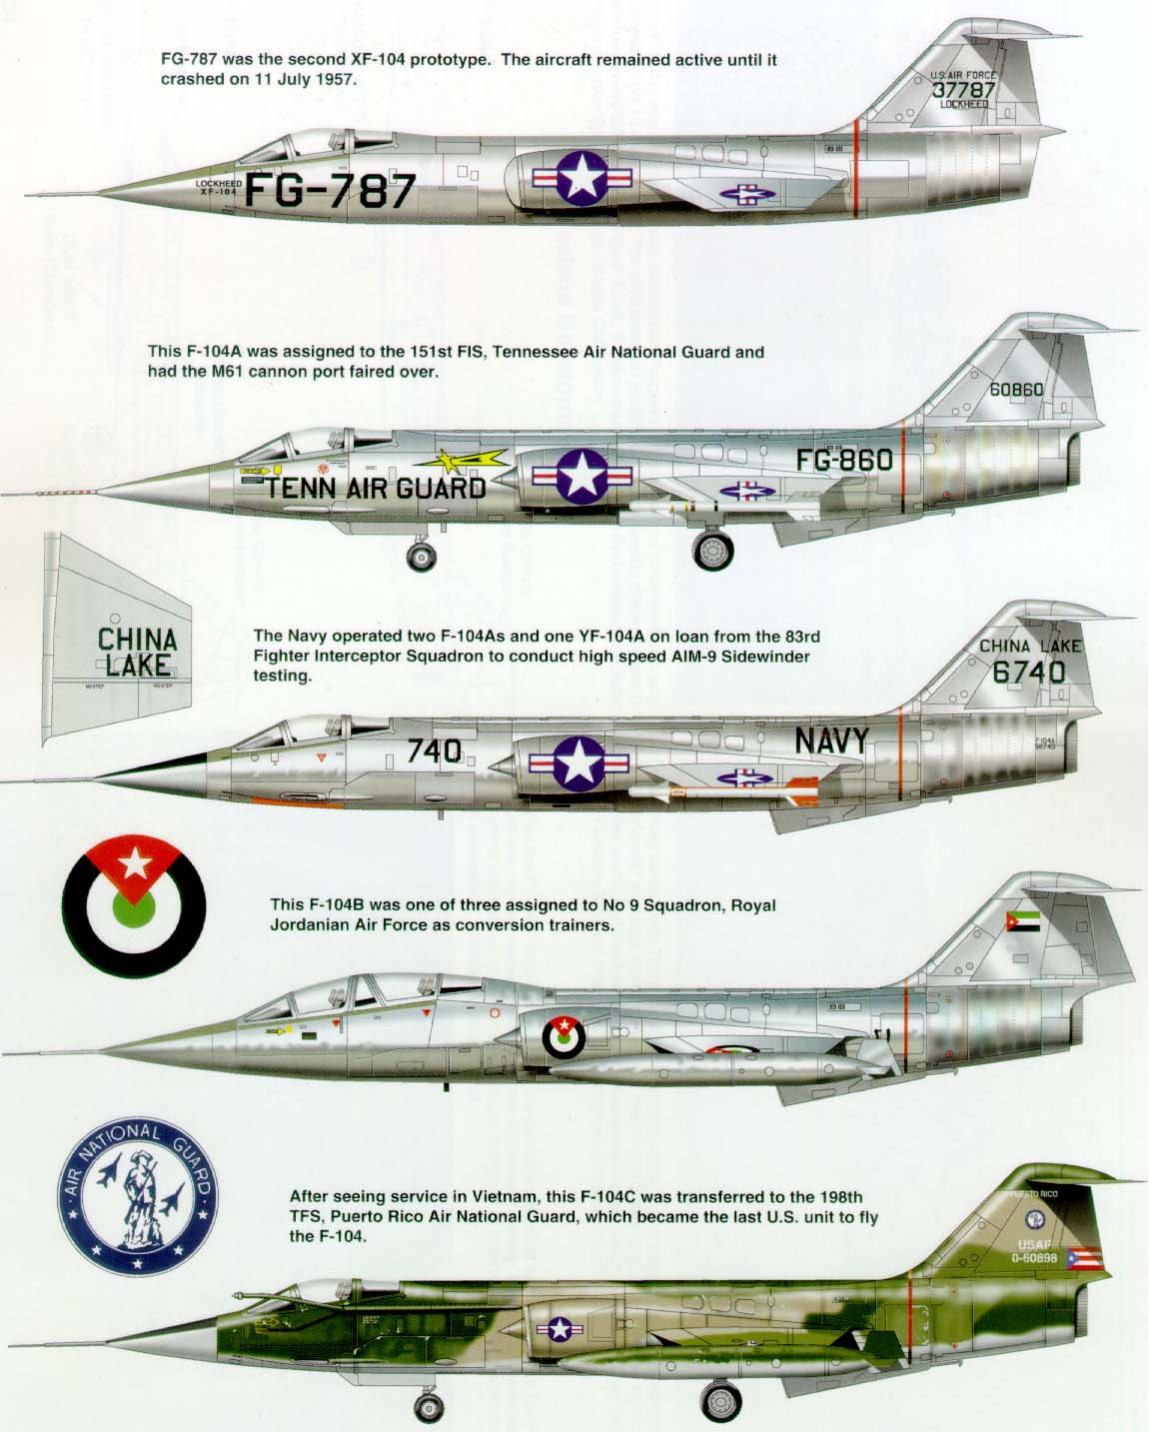 1706479852 830 Variants of the ‘Man in the Missile Starfighter